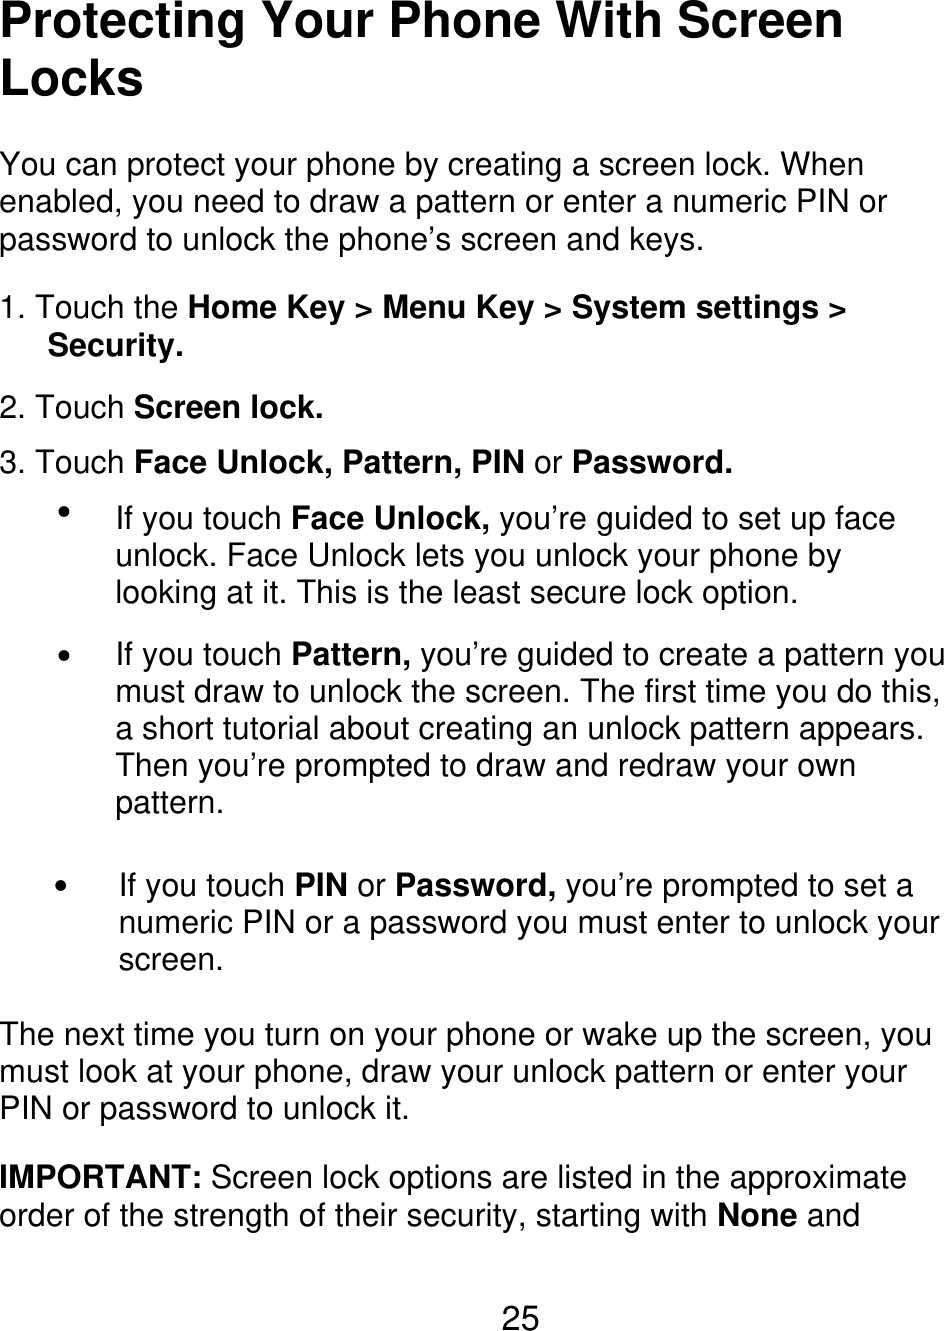 Protecting Your Phone With Screen Locks You can protect your phone by creating a screen lock. When enabled, you need to draw a pattern or enter a numeric PIN or password to unlock the phone’s screen and keys. 1. Touch the Home Key &gt; Menu Key &gt; System settings &gt;    Security. 2. Touch Screen lock. 3. Touch Face Unlock, Pattern, PIN or Password.  If you touch Face Unlock, you’re guided to set up face unlock. Face Unlock lets you unlock your phone by looking at it. This is the least secure lock option. If you touch Pattern, you’re guided to create a pattern you must draw to unlock the screen. The first time you do this, a short tutorial about creating an unlock pattern appears. Then you’re prompted to draw and redraw your own pattern. If you touch PIN or Password, you’re prompted to set a numeric PIN or a password you must enter to unlock your screen.   The next time you turn on your phone or wake up the screen, you must look at your phone, draw your unlock pattern or enter your PIN or password to unlock it. IMPORTANT: Screen lock options are listed in the approximate order of the strength of their security, starting with None and 25 